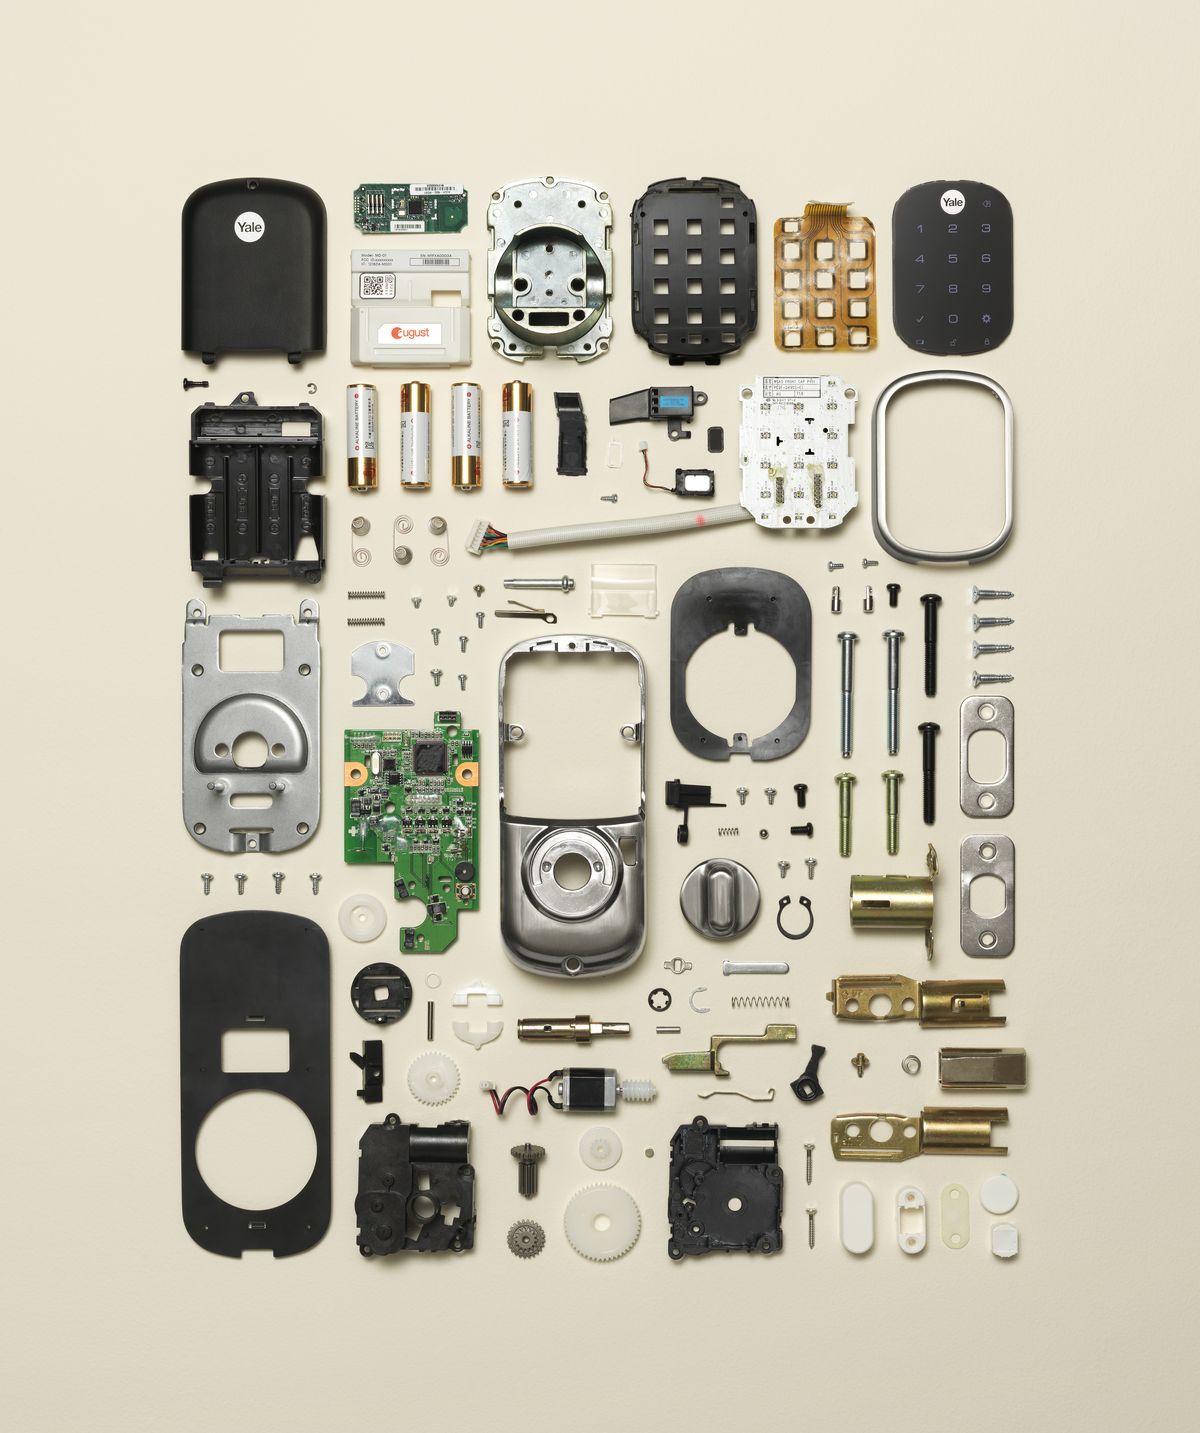 Electronics, Technology, Electronic component, Electronic device, Mobile phone accessories, Gadget, 